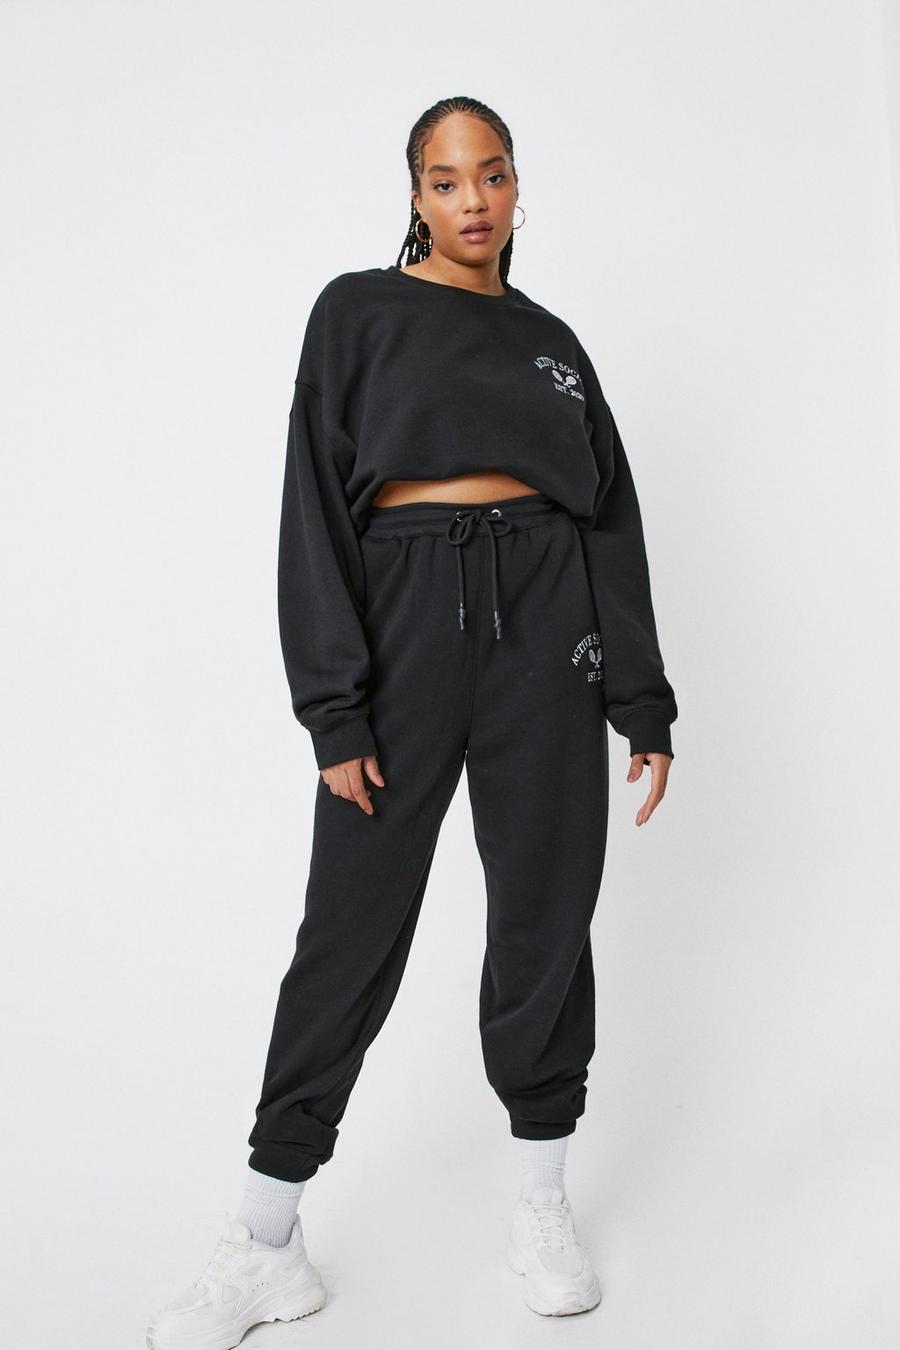 Plus Size Active Society Embroidered Sweatpants